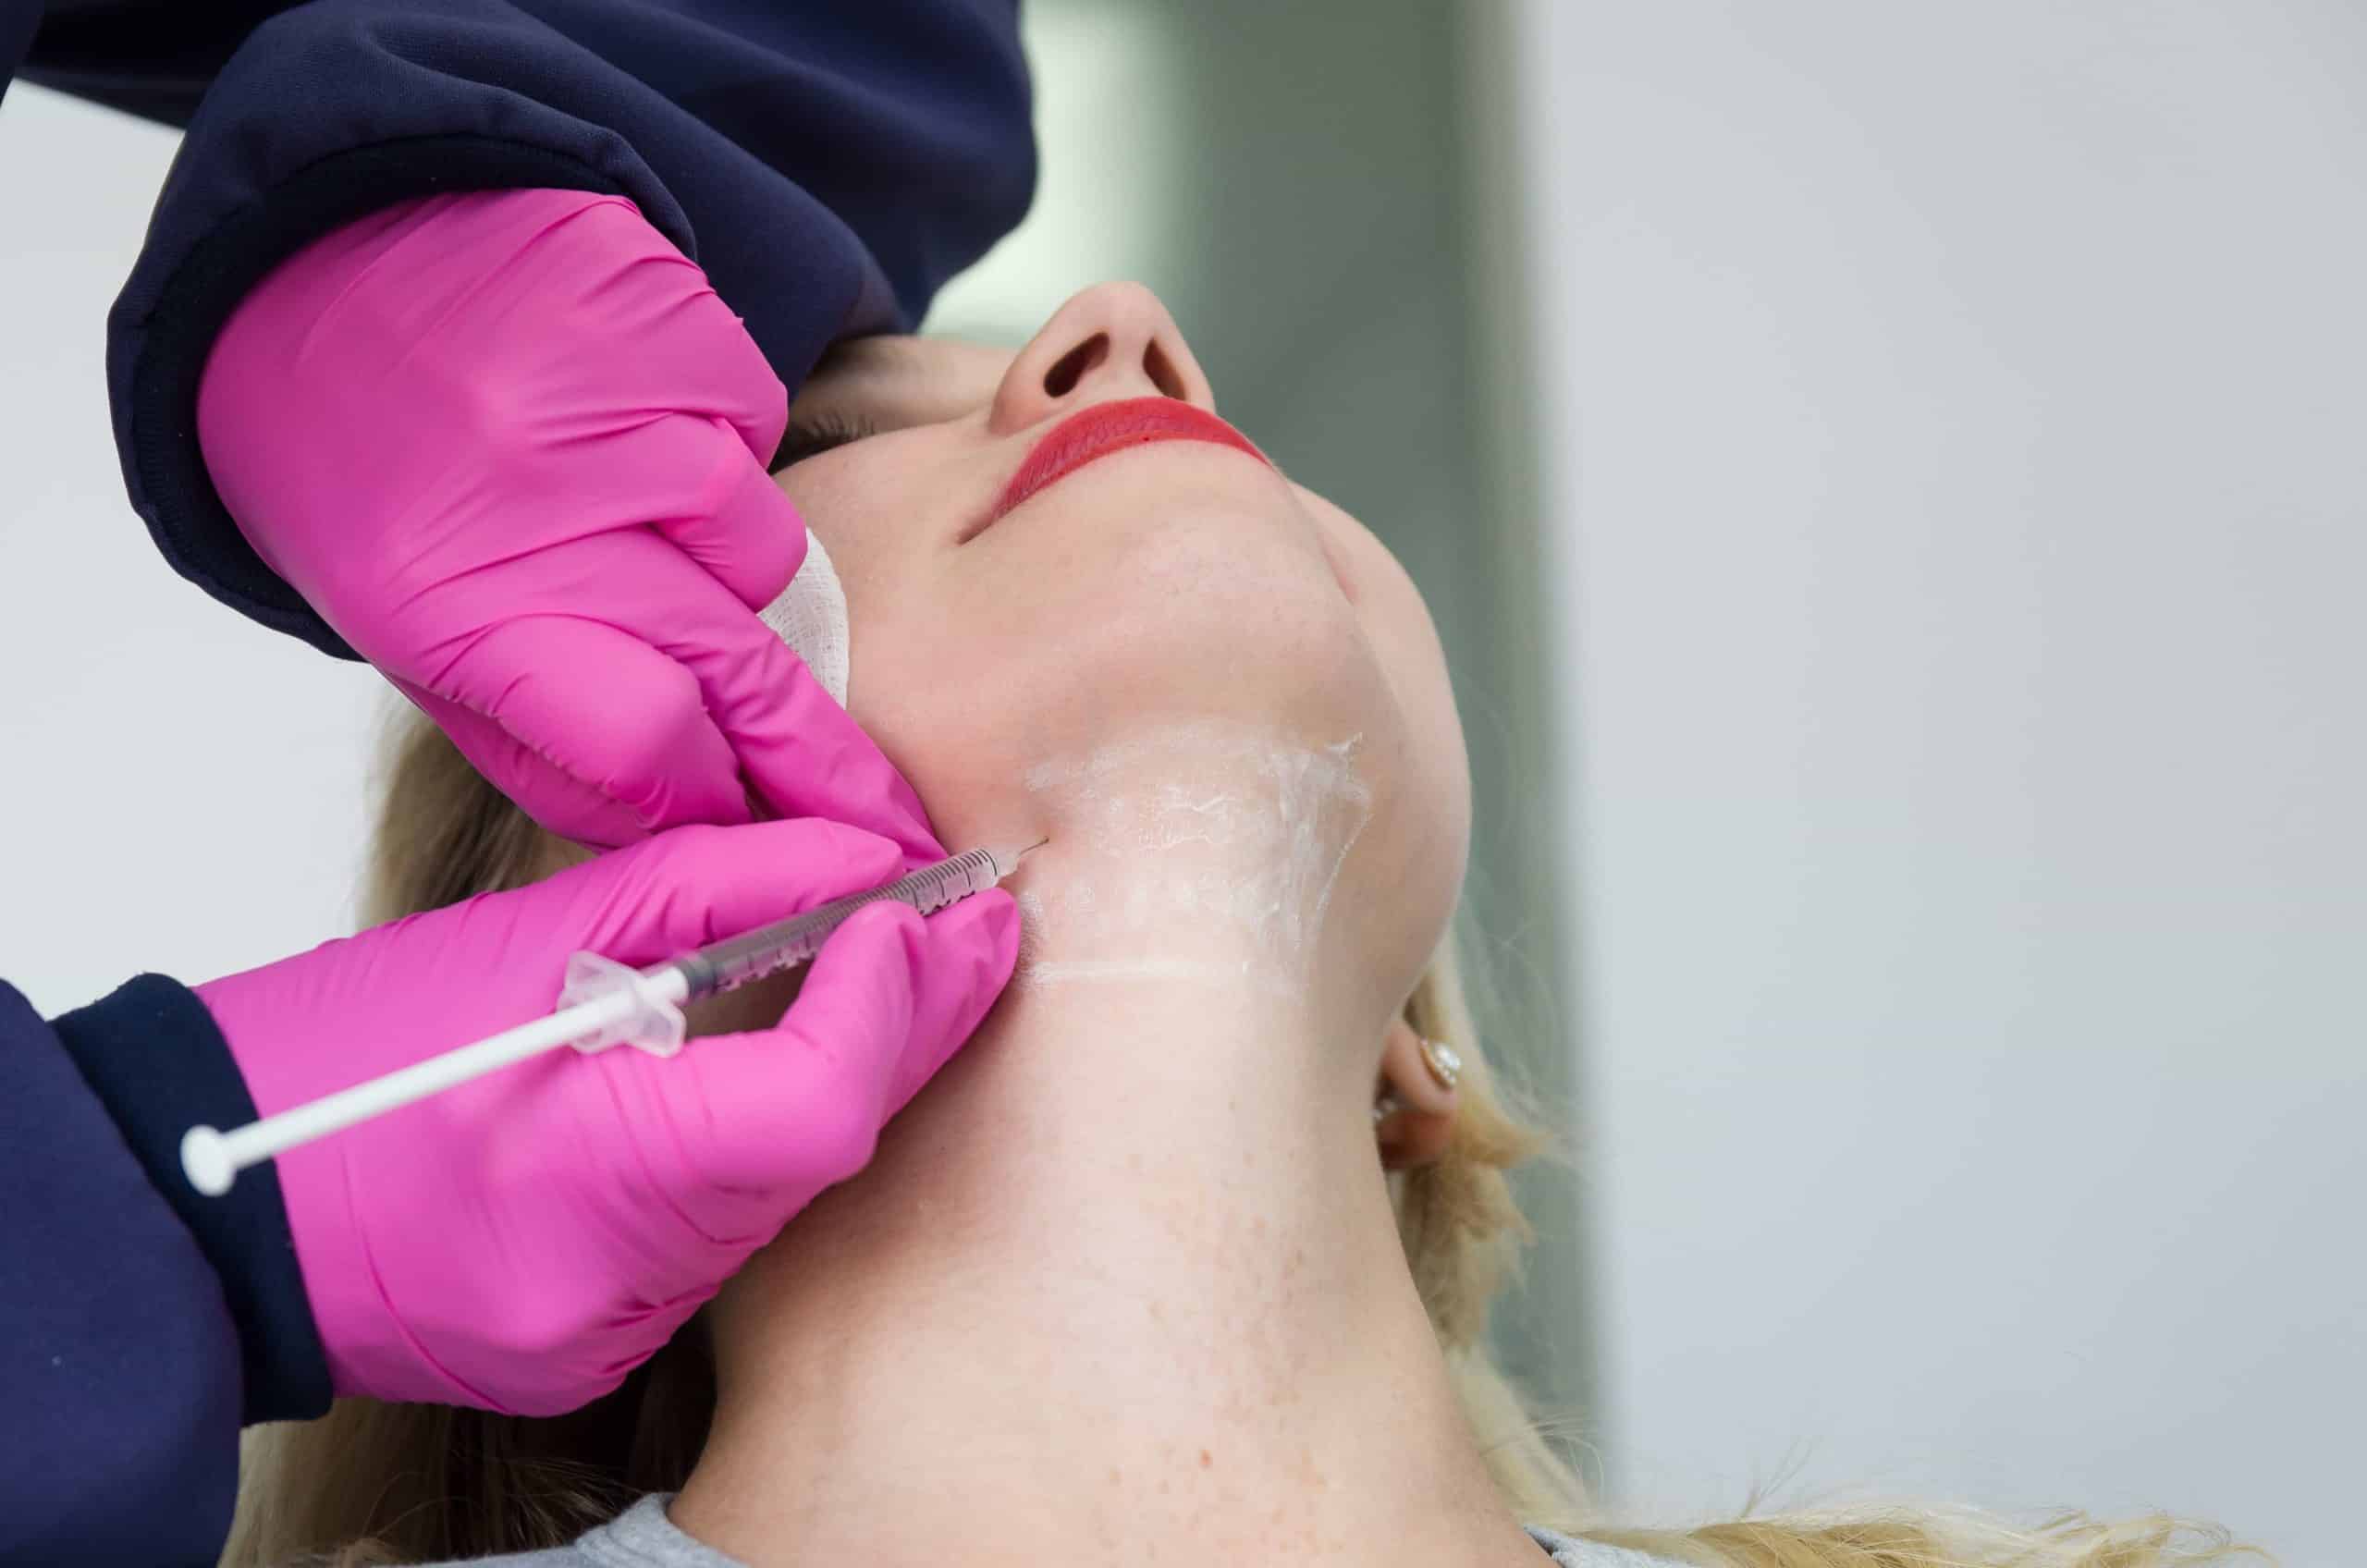 What To Expect During a Kybella Treatment